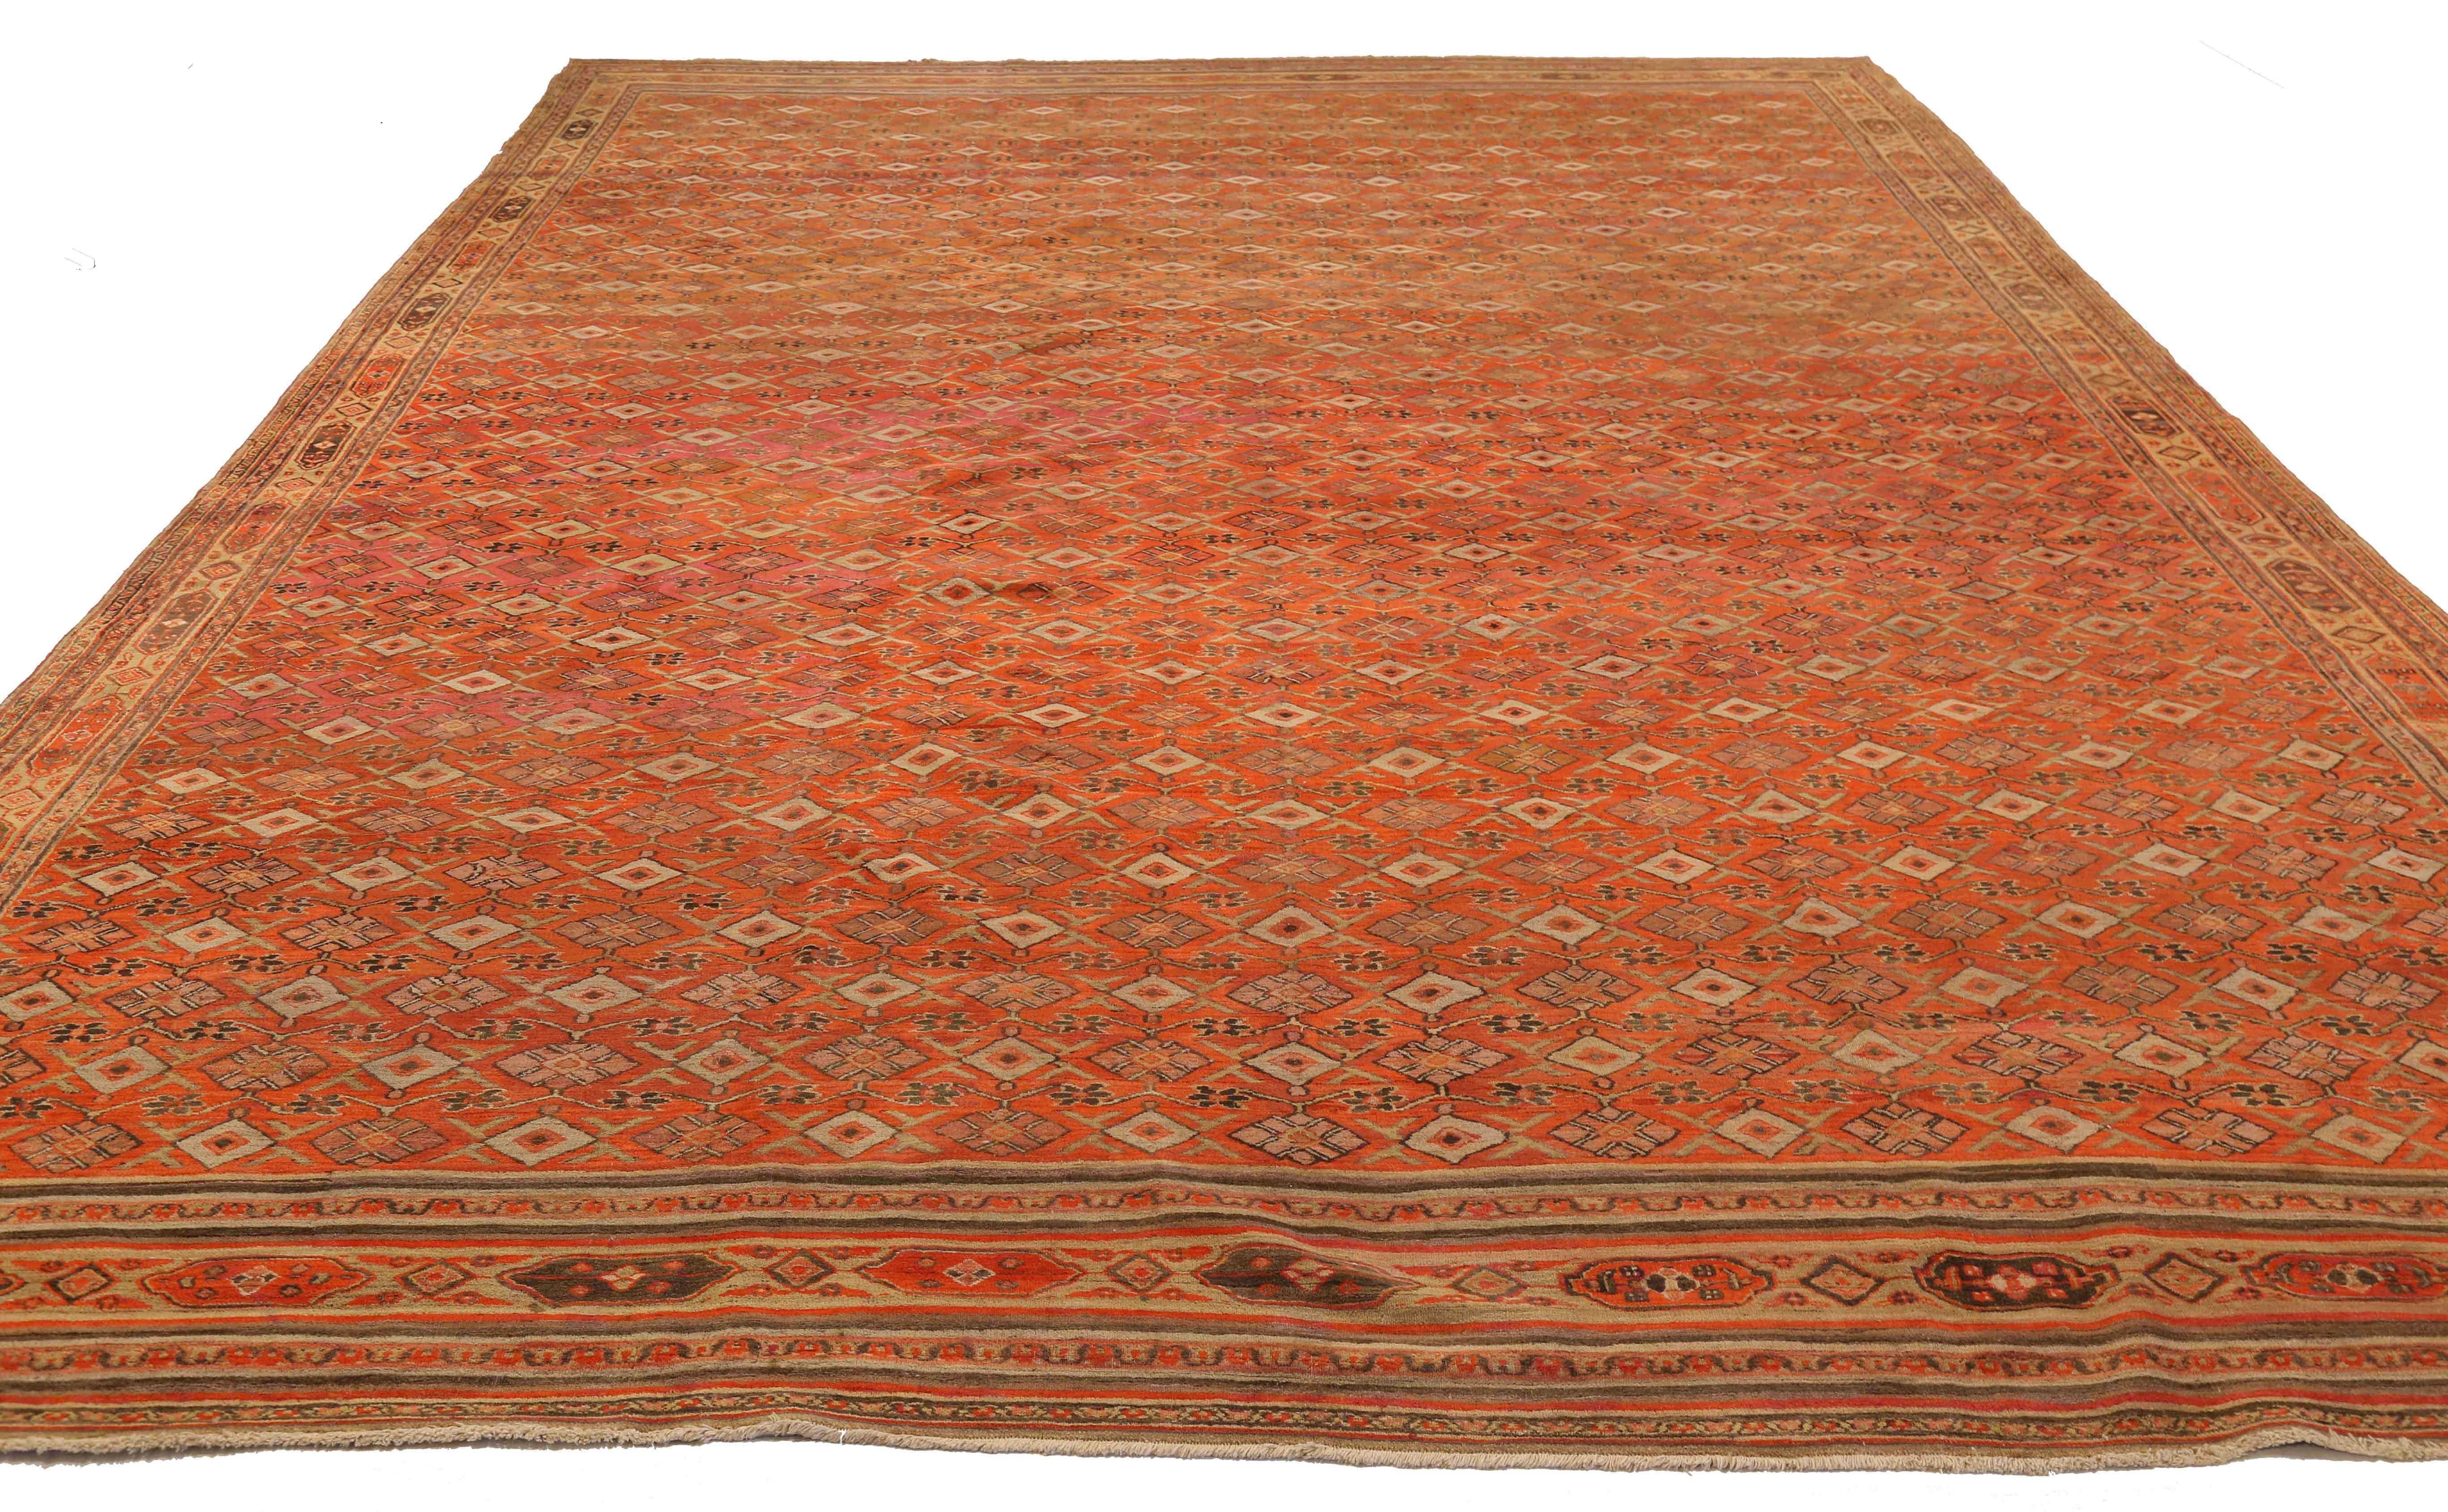 Antique Doroksh from Iran area rug handwoven from the finest sheep’s wool. It’s colored with all-natural vegetable dyes that are safe for humans and pets. It’s a traditional Samarghand design handwoven by expert artisans. It’s a lovely area rug that